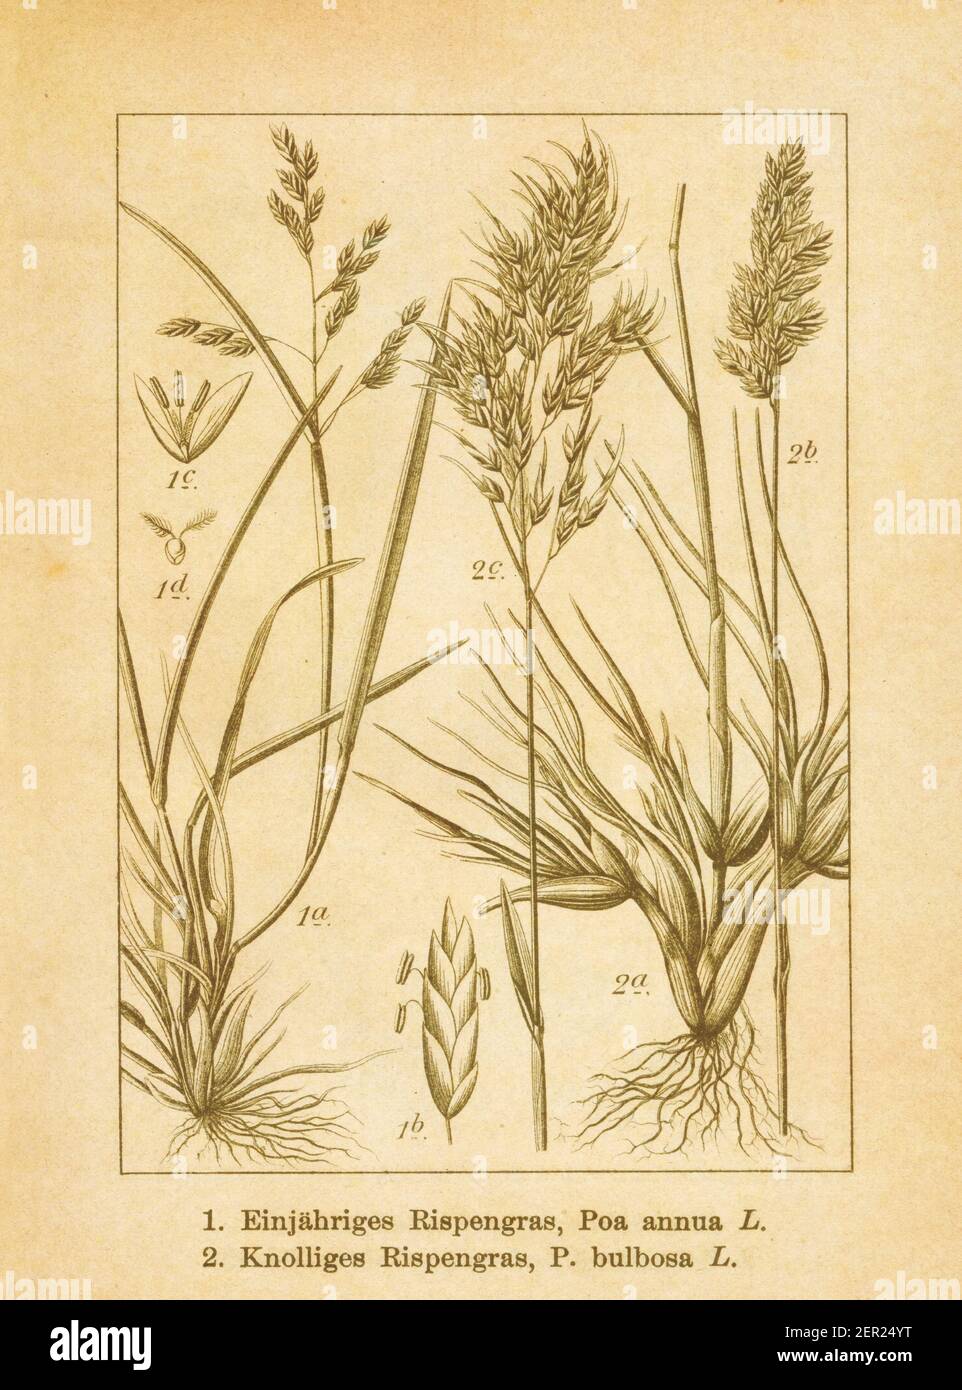 Antique illustration of poa annua (also known as annual bluegrass or annual meadow grass) and poa bulbosa (also known as bulbous bluegrass). Engraved Stock Photo